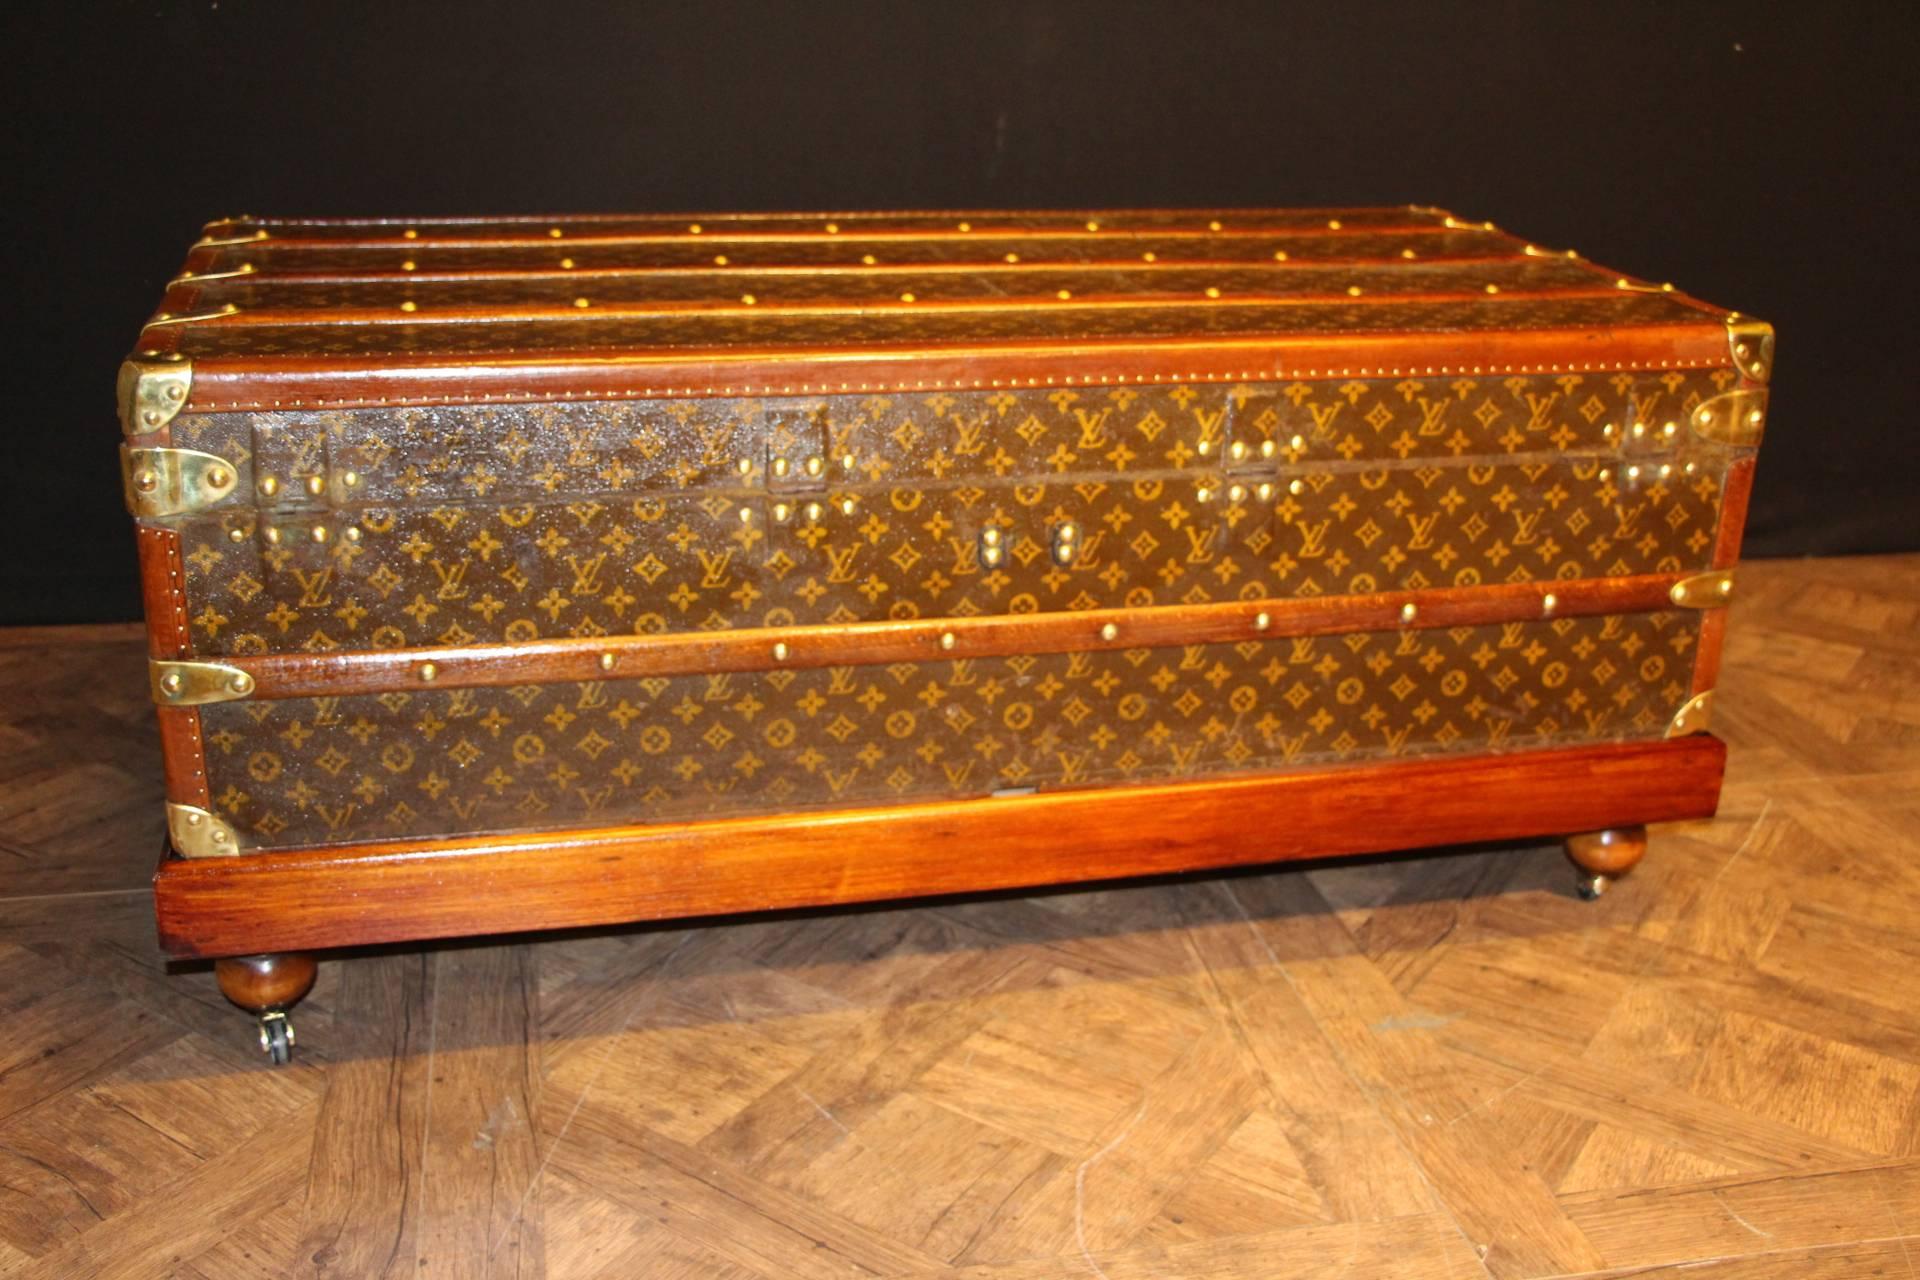 This beautiful Louis Vuitton cabin trunk has stenciled LV monogram canvas, brass fittings and lozine trim.
Inside is all original lining, in good condition.
A wood base has been custom for this trunk that you may use or not.
Its use is to get it